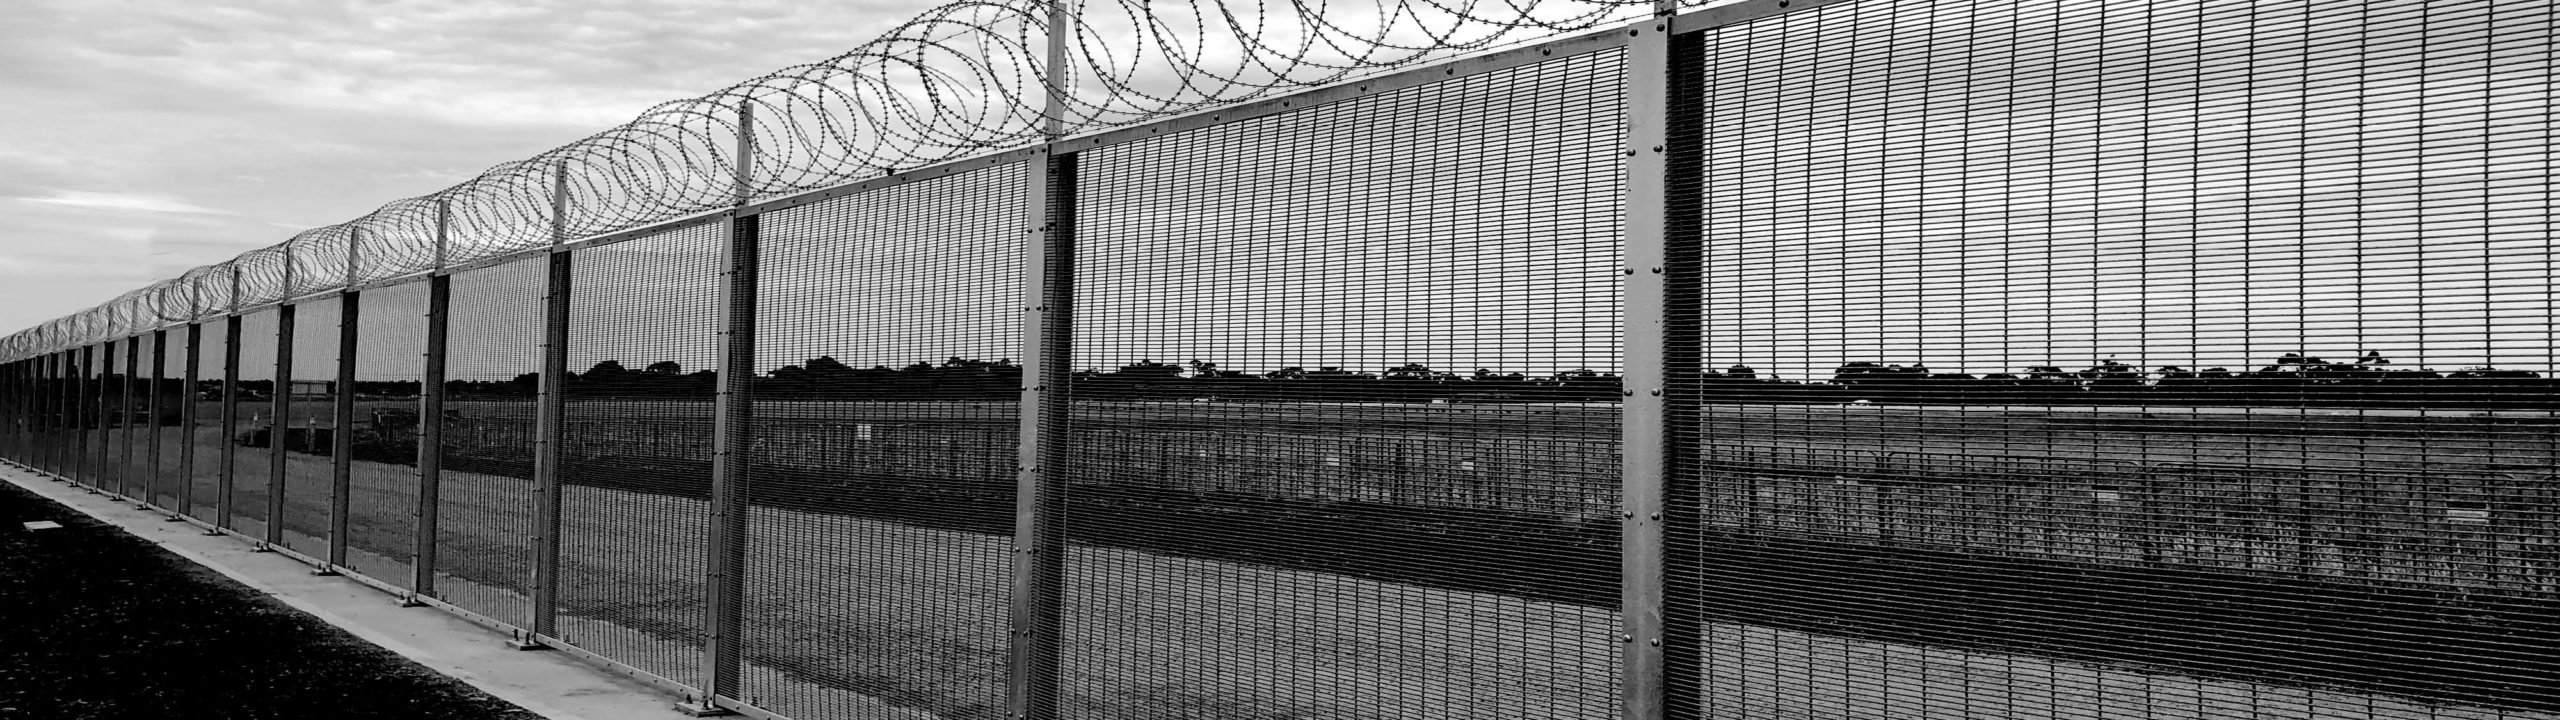 Commercial and industrial fencing - Defence High Security